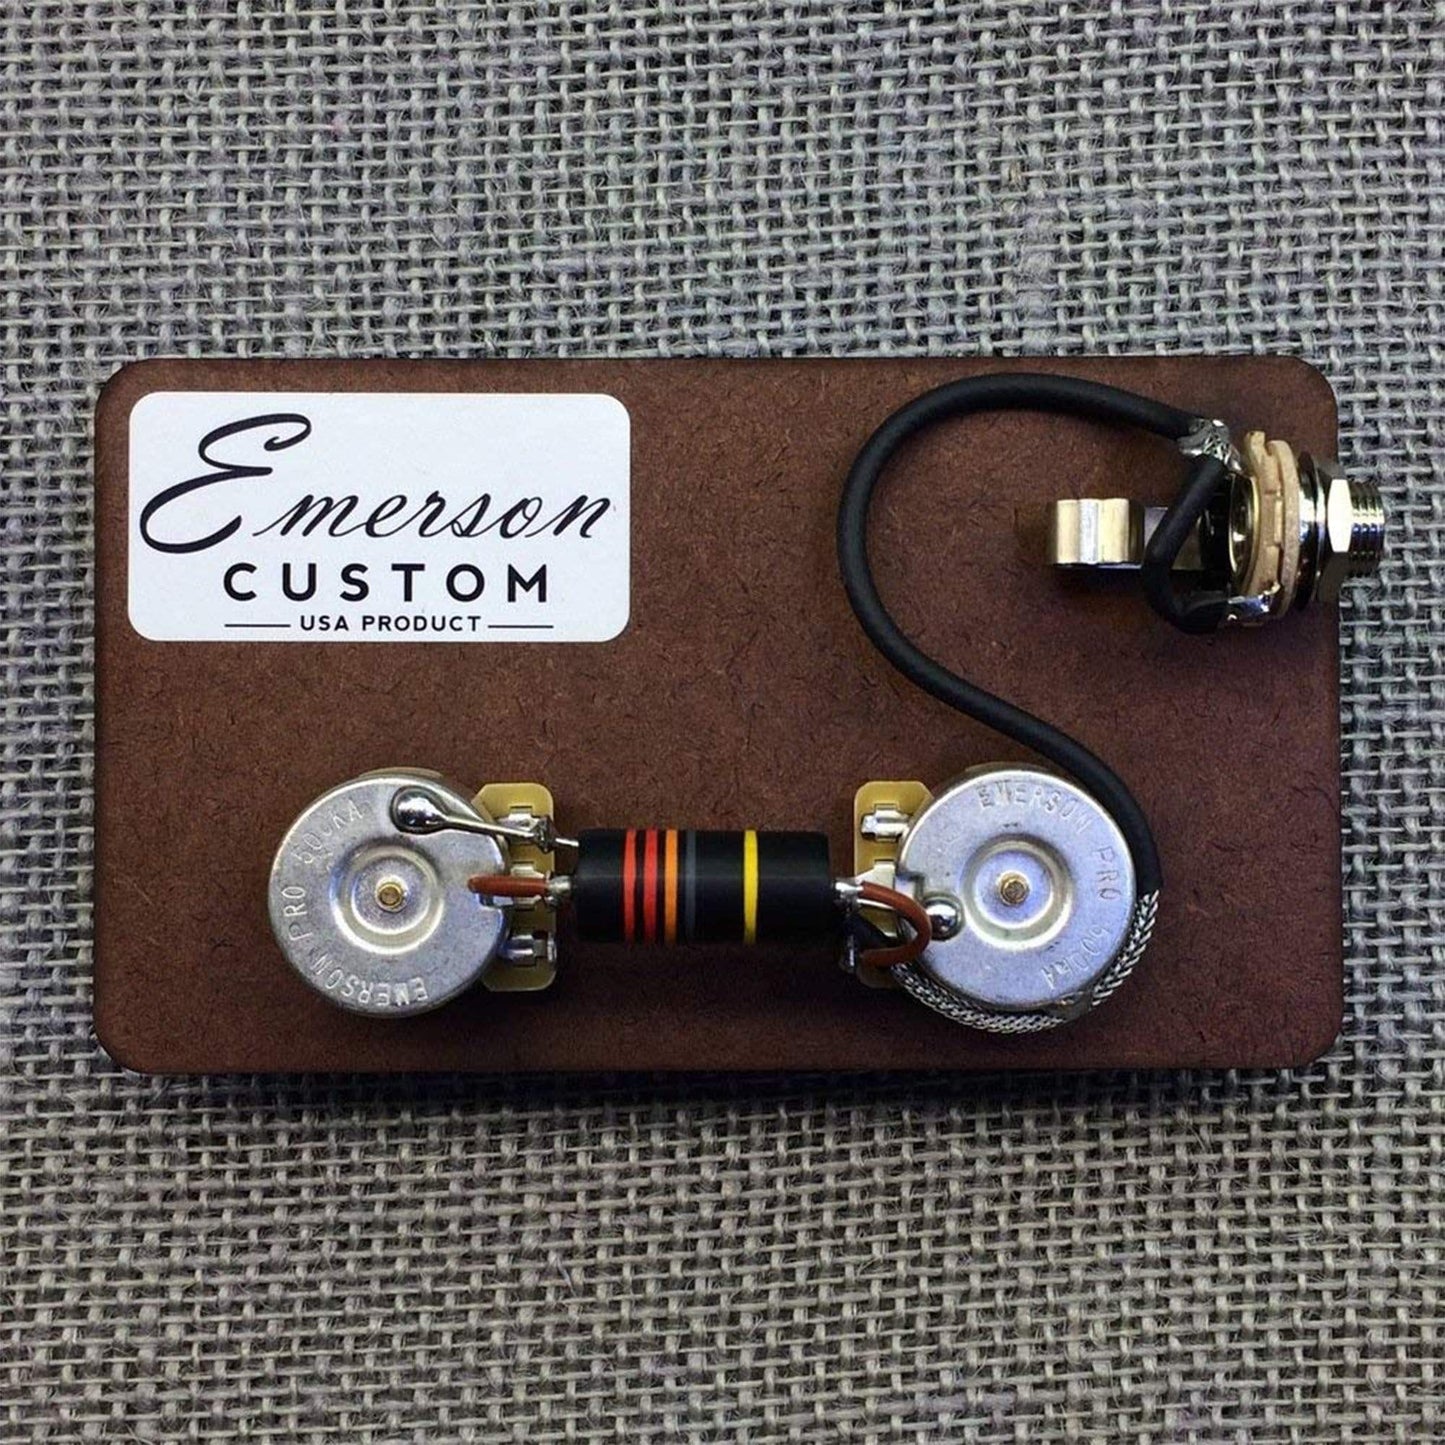 Emerson Custom Prewired Kit for Les Paul Junior (500K Ohm Pots & 0.022Uf Bumblebee Capacitor) Parts / Guitar Pickups